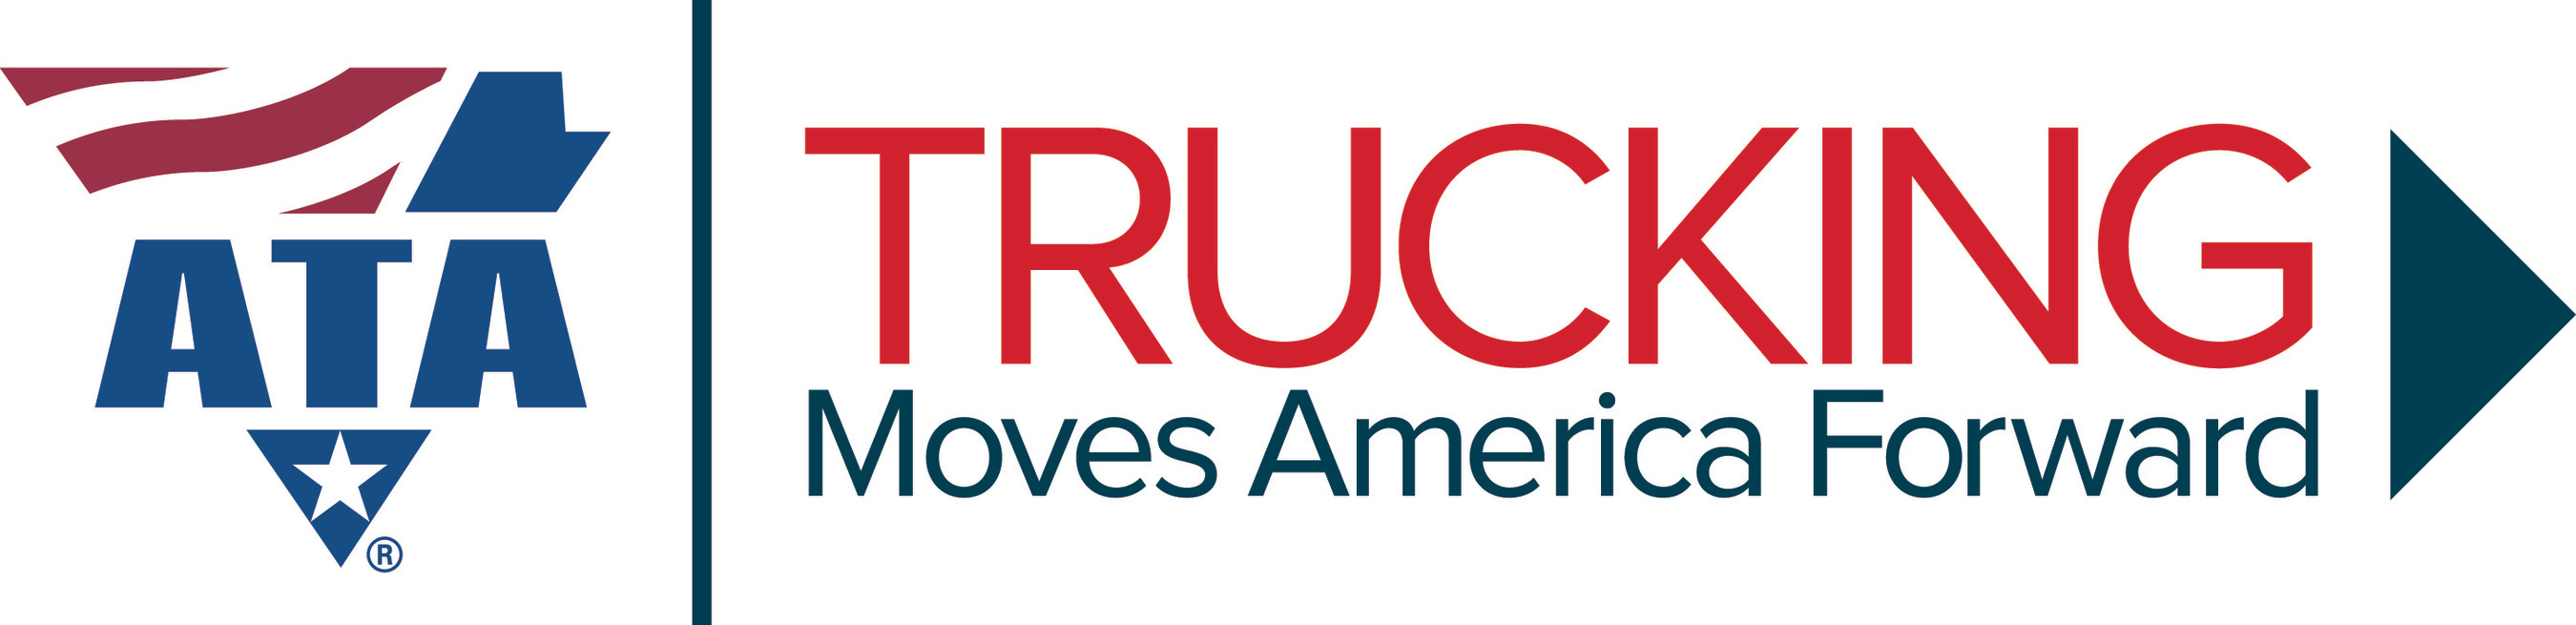 rican Trucking Associations is the largest national trade association for the trucking industry. Through a federation of 50 affiliated state trucking associations and industry-related conferences and councils, ATA is the voice of the industry America depends on most to move our nation's freight.Trucking Moves America Forward.